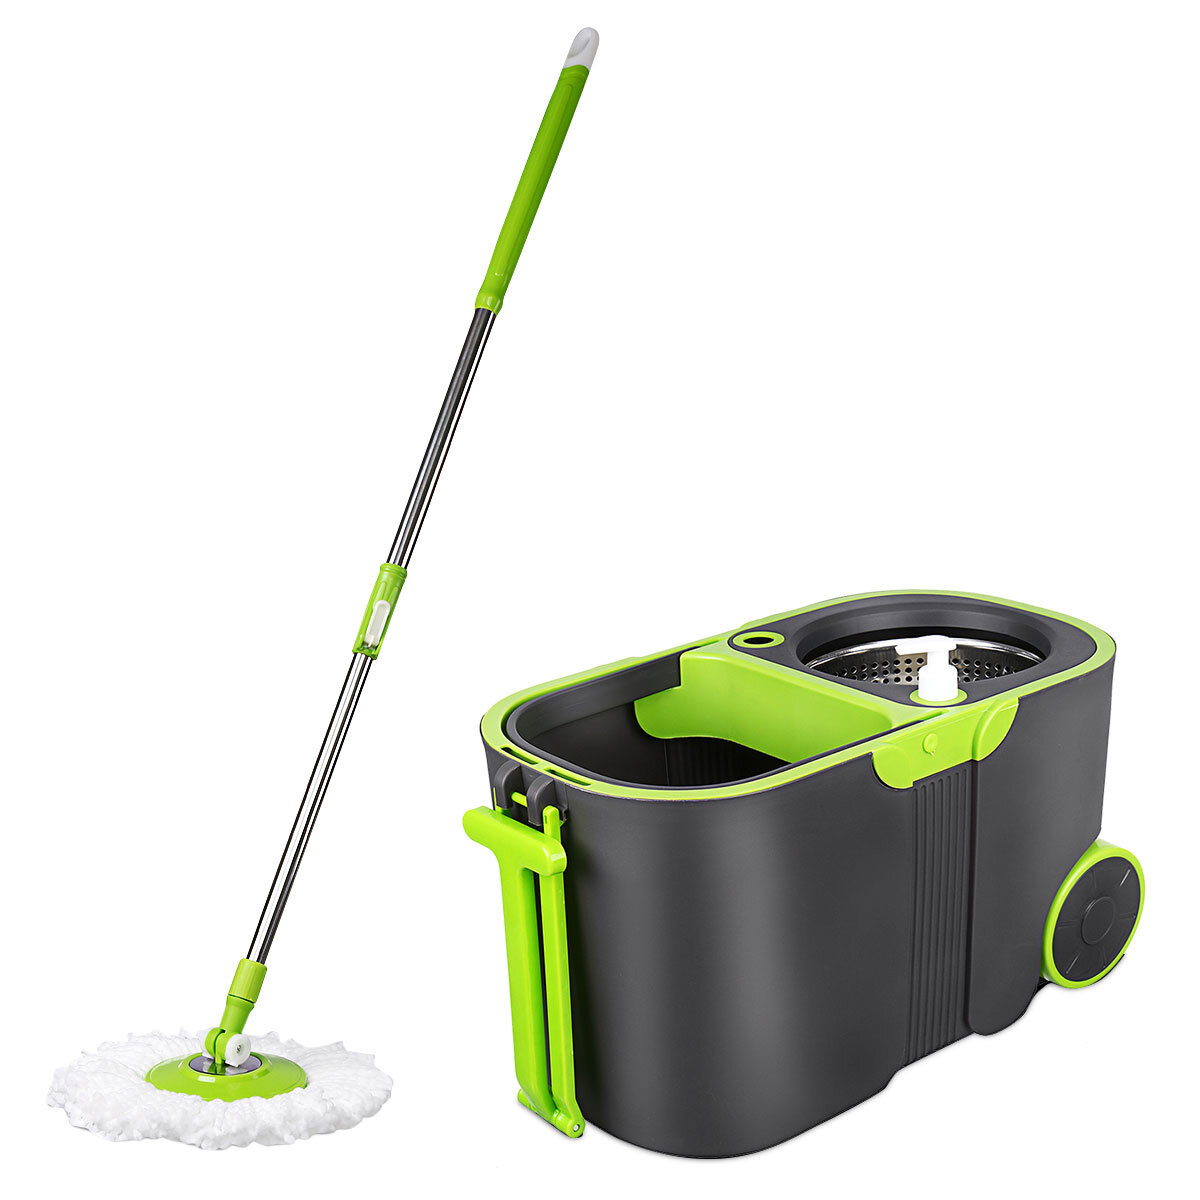 360 Degree Spinning Mop bucket Home 2 Mop Cleaning heads with colapsible Bucket